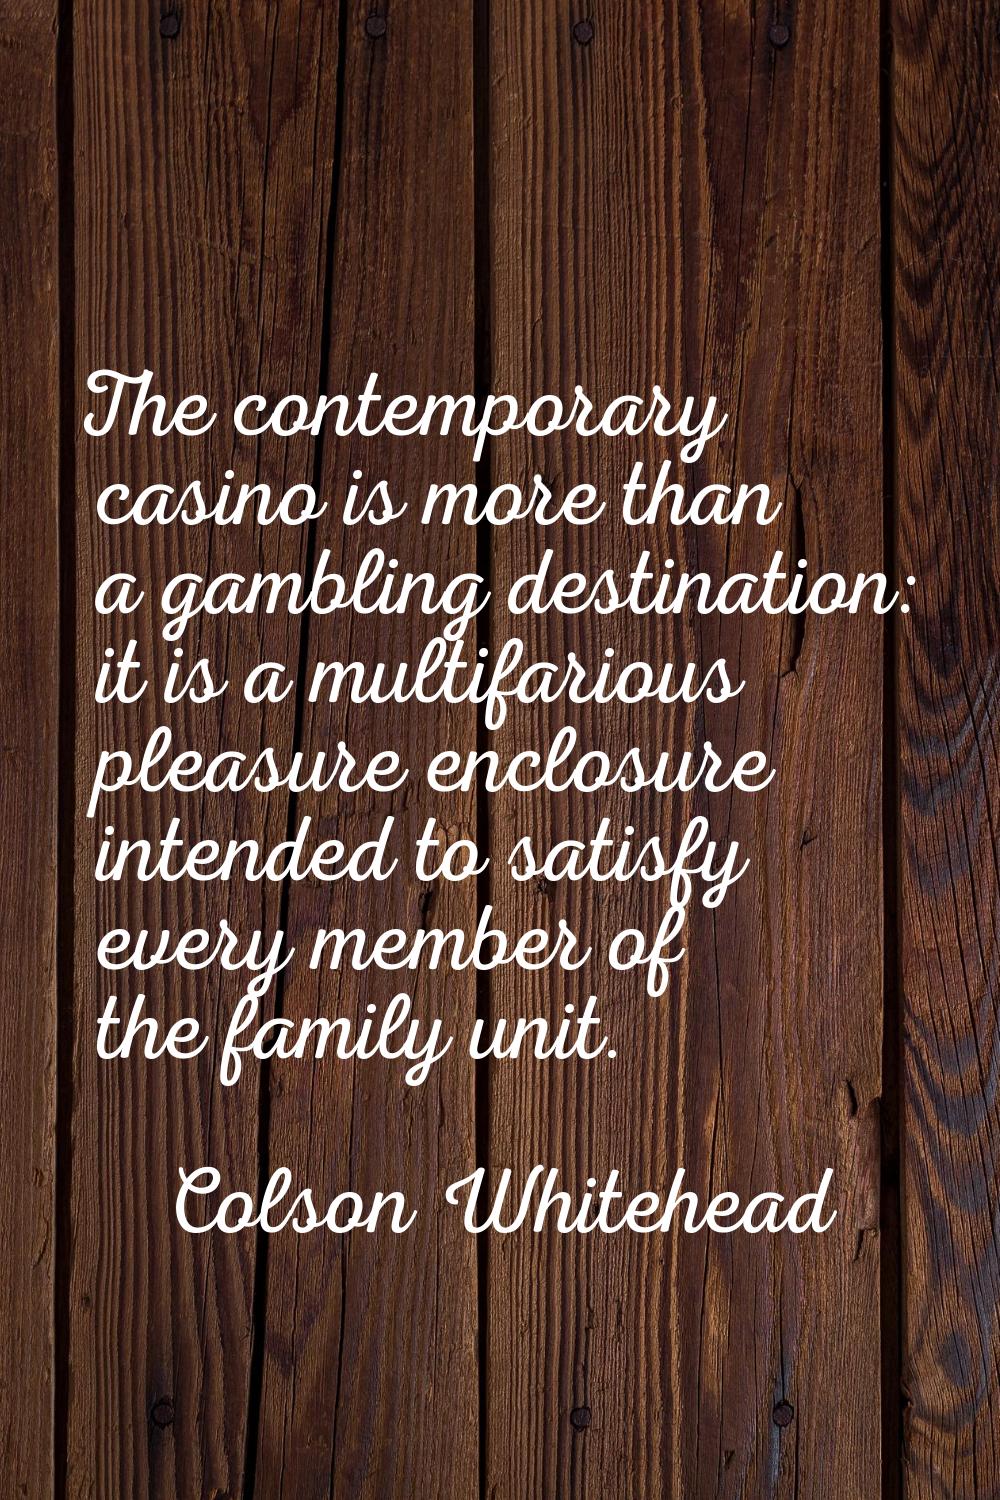 The contemporary casino is more than a gambling destination: it is a multifarious pleasure enclosur